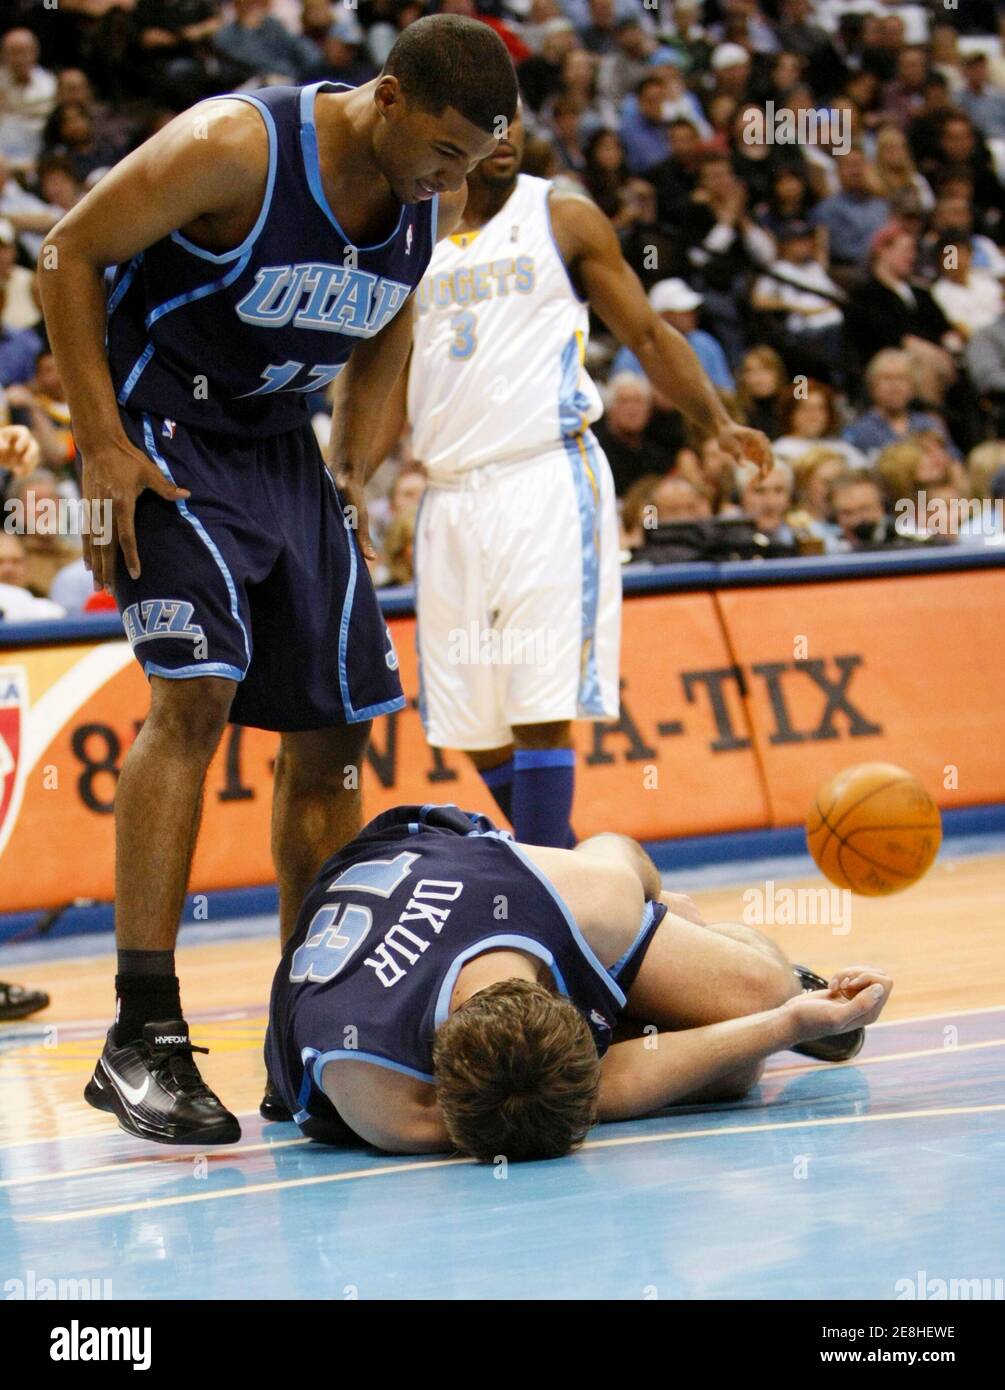 Utah Jazz Ronnie Price (L) looks at starting center Mehmet Okur as he lies on the court injured in Game 1 of their NBA Western Conference playoff series against the Denver Nuggets in Denver April 17, 2010. REUTERS/Rick Wilking (UNITED STATES - Tags: SPORT BASKETBALL) Stock Photo